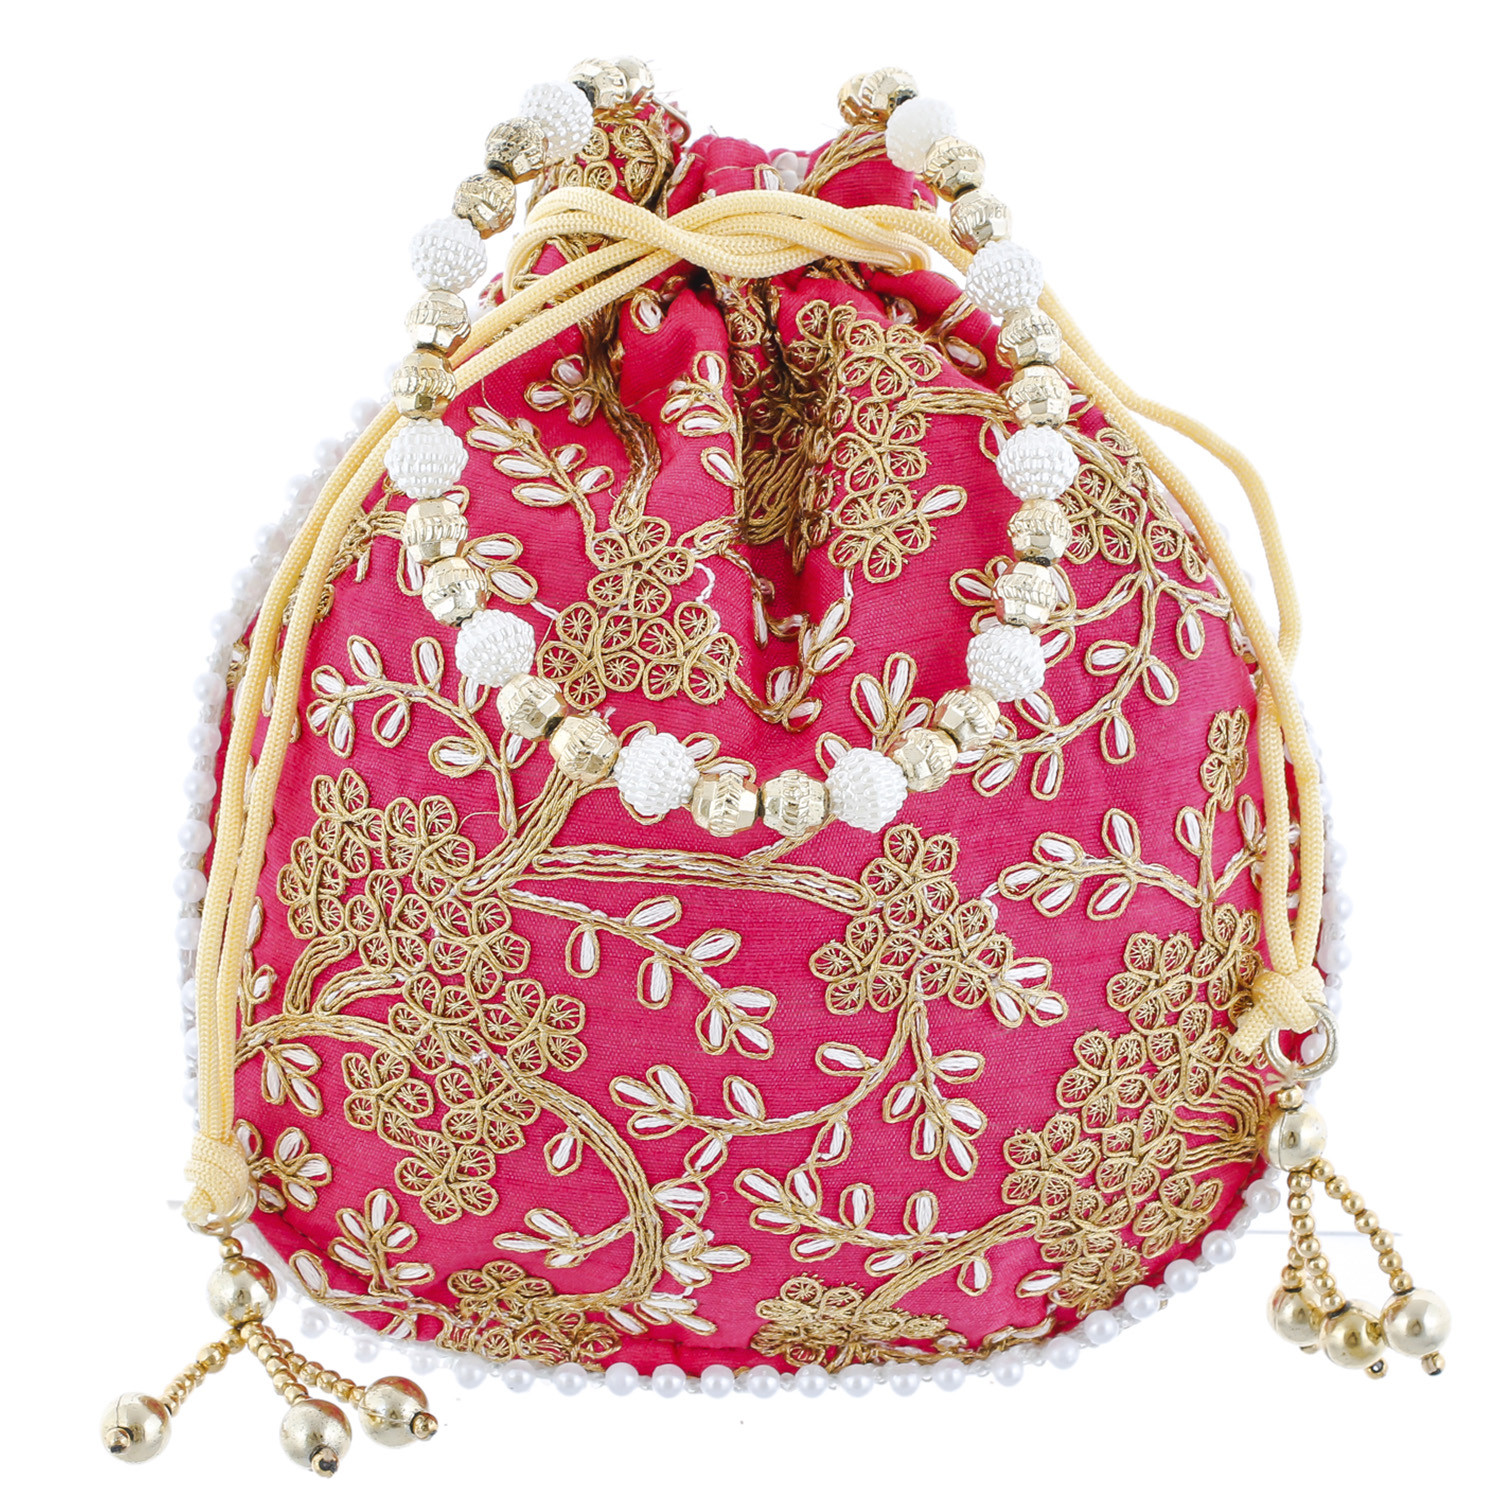 Kuber Industries Embroidery Drawstring Potli|Hand Purse With Gold Pearl Border & Handle For Woman,Girls Pack of 2 (Maroon & Pink)